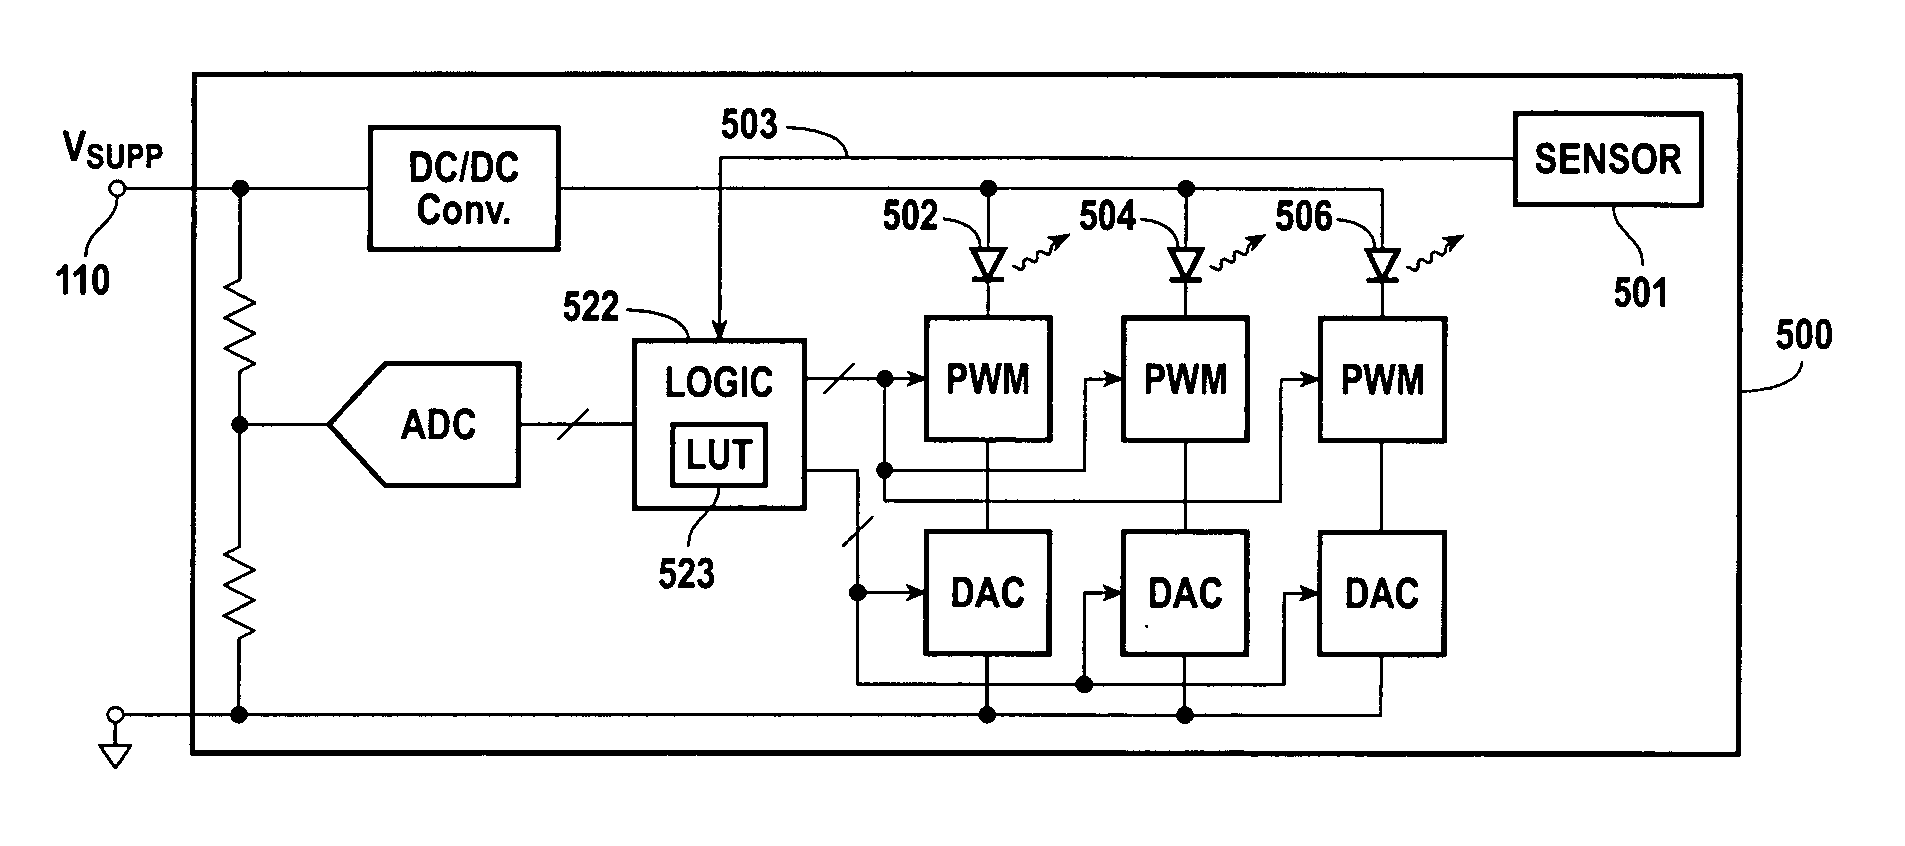 Two-terminal LED device with tunable color